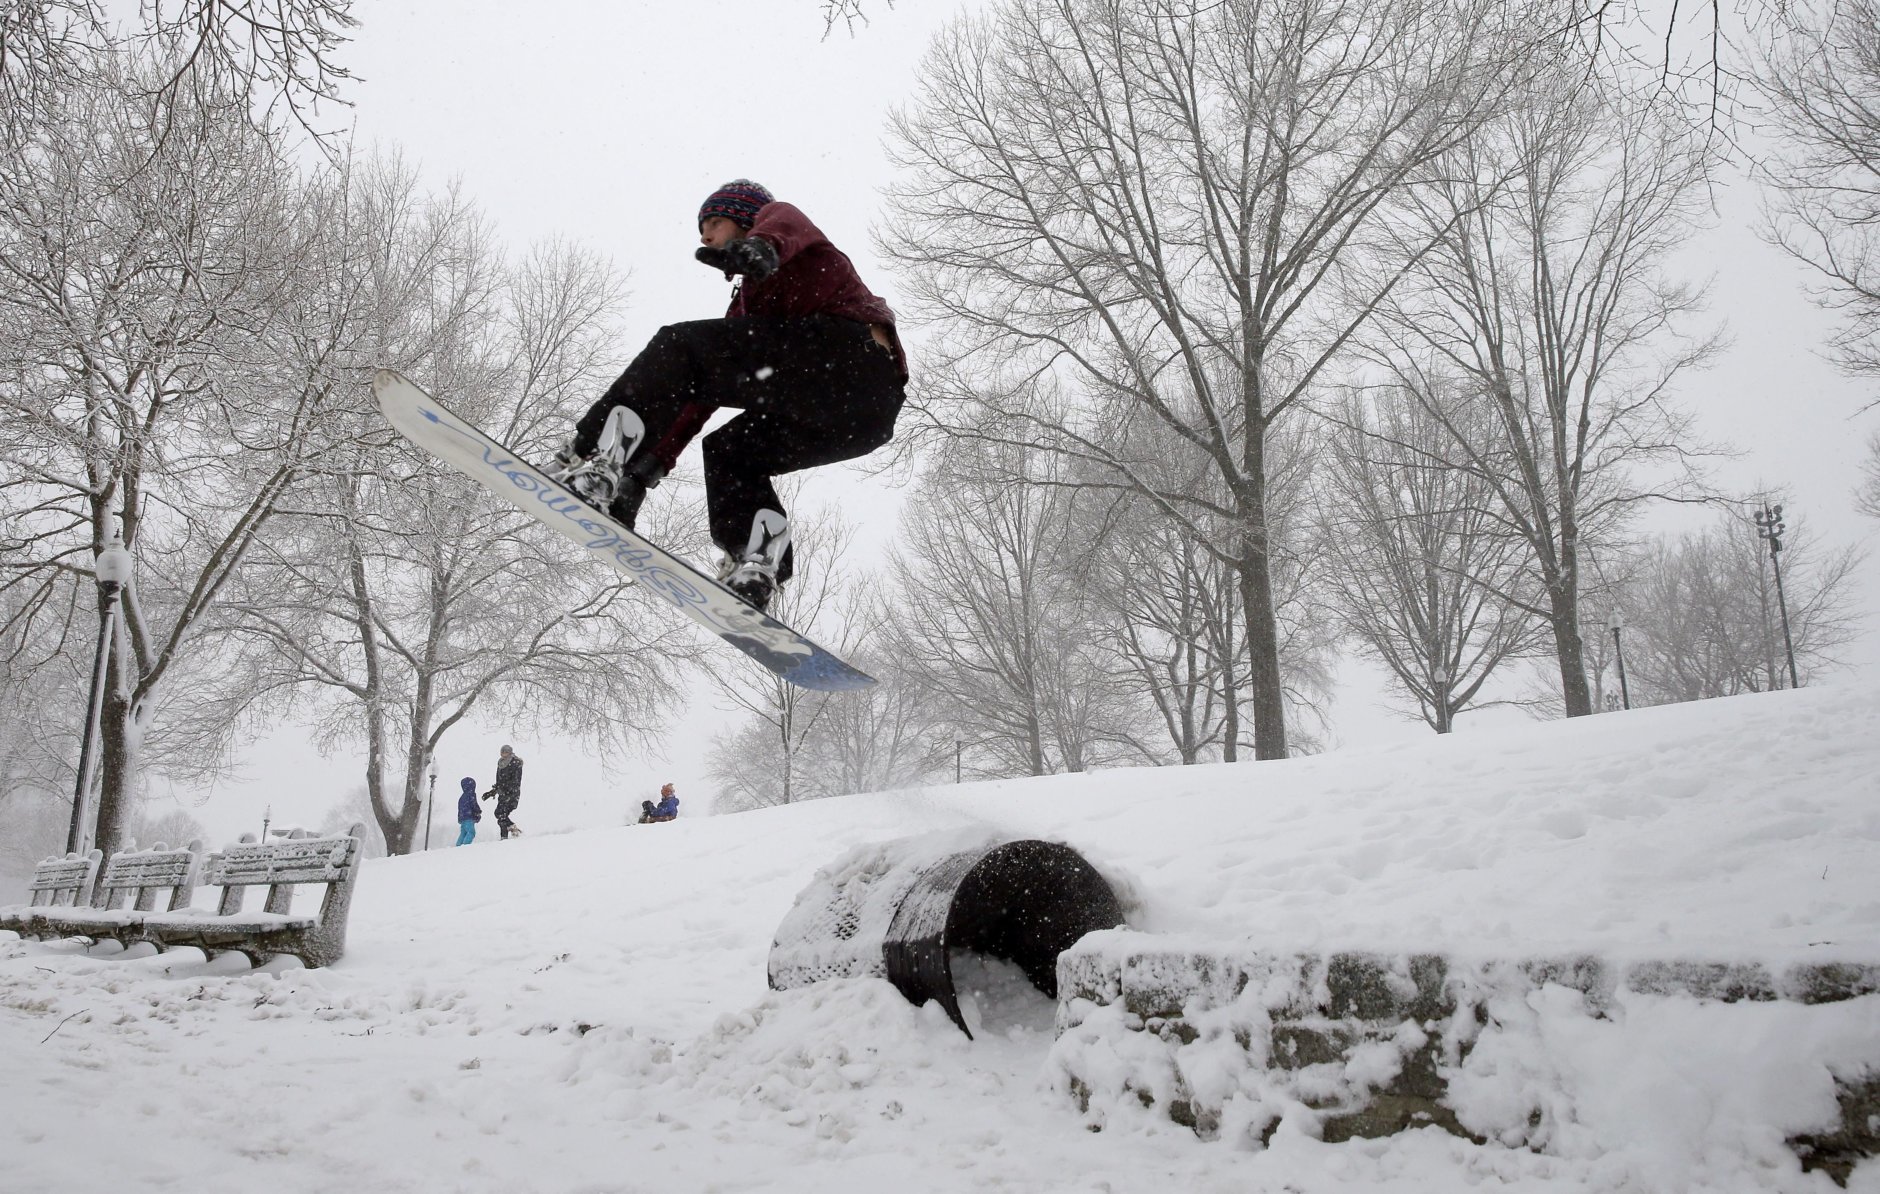 A snowboarder soars during a snowstorm, Tuesday, March 13, 2018, in Boston. The third major nor’easter in two weeks slammed New England on Tuesday, bringing blizzard conditions and more than a foot of snow to some communities.   (AP Photo/Michael Dwyer)